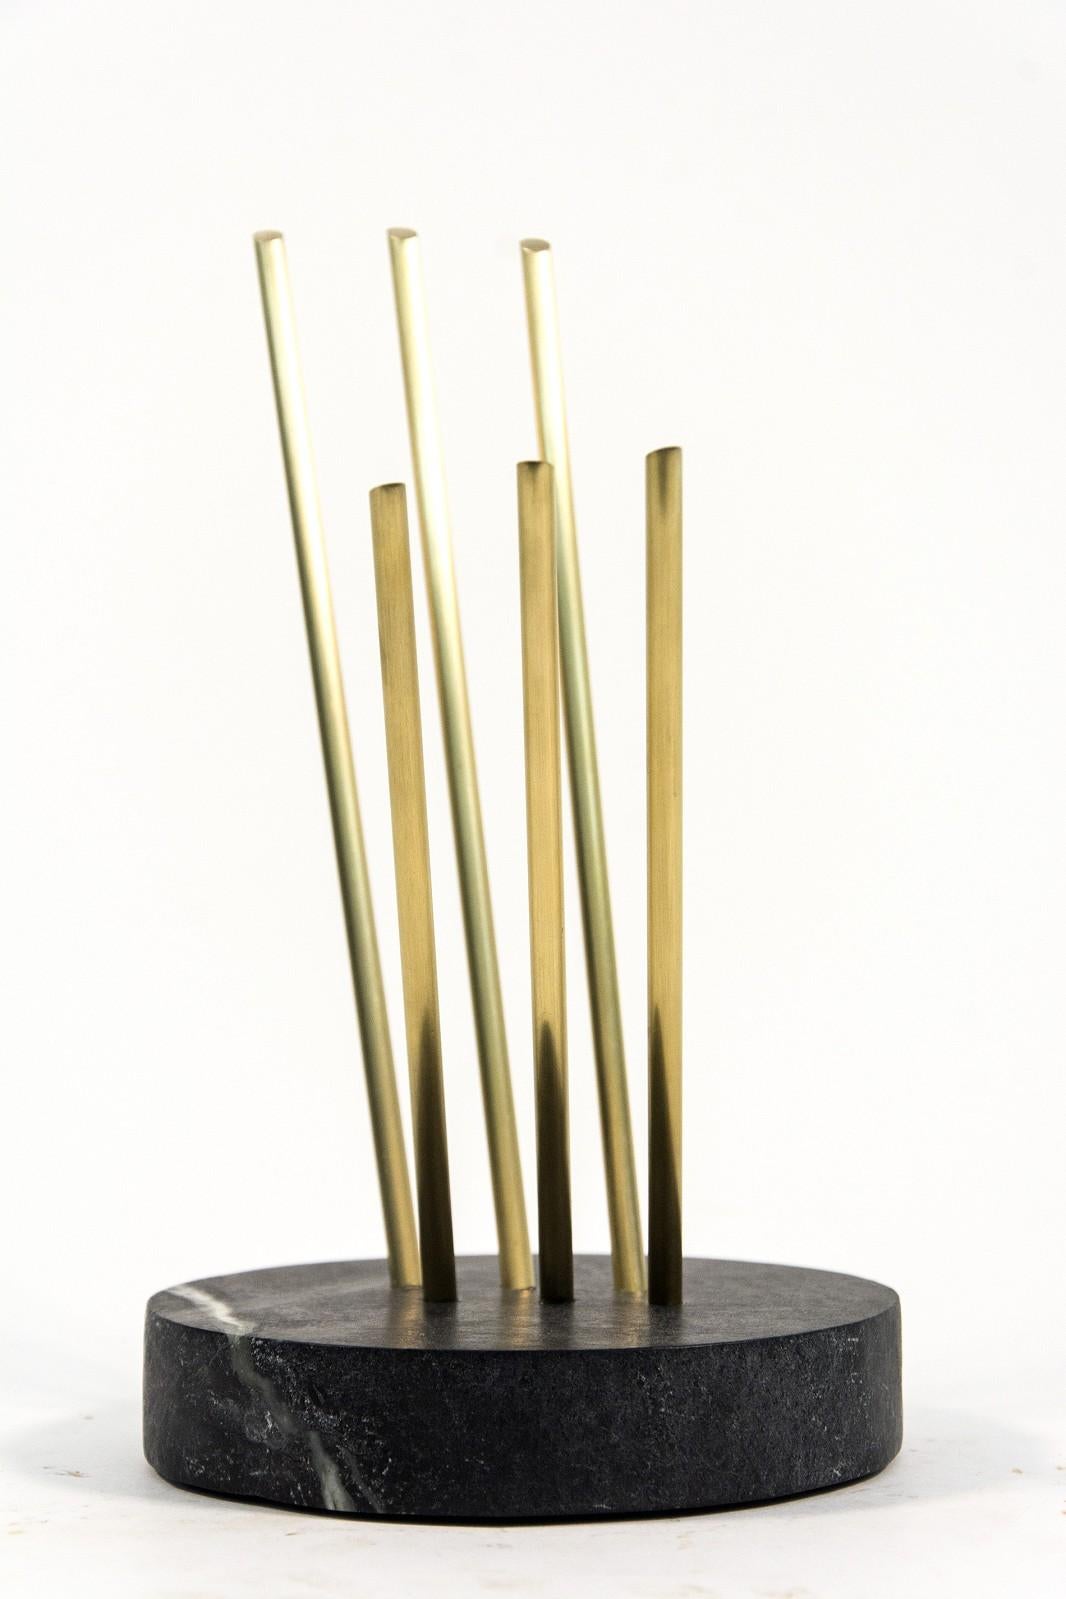 Earthshine (Maquette) - small, polished brass and soapstone tabletop sculpture - Contemporary Sculpture by Tonya Hart